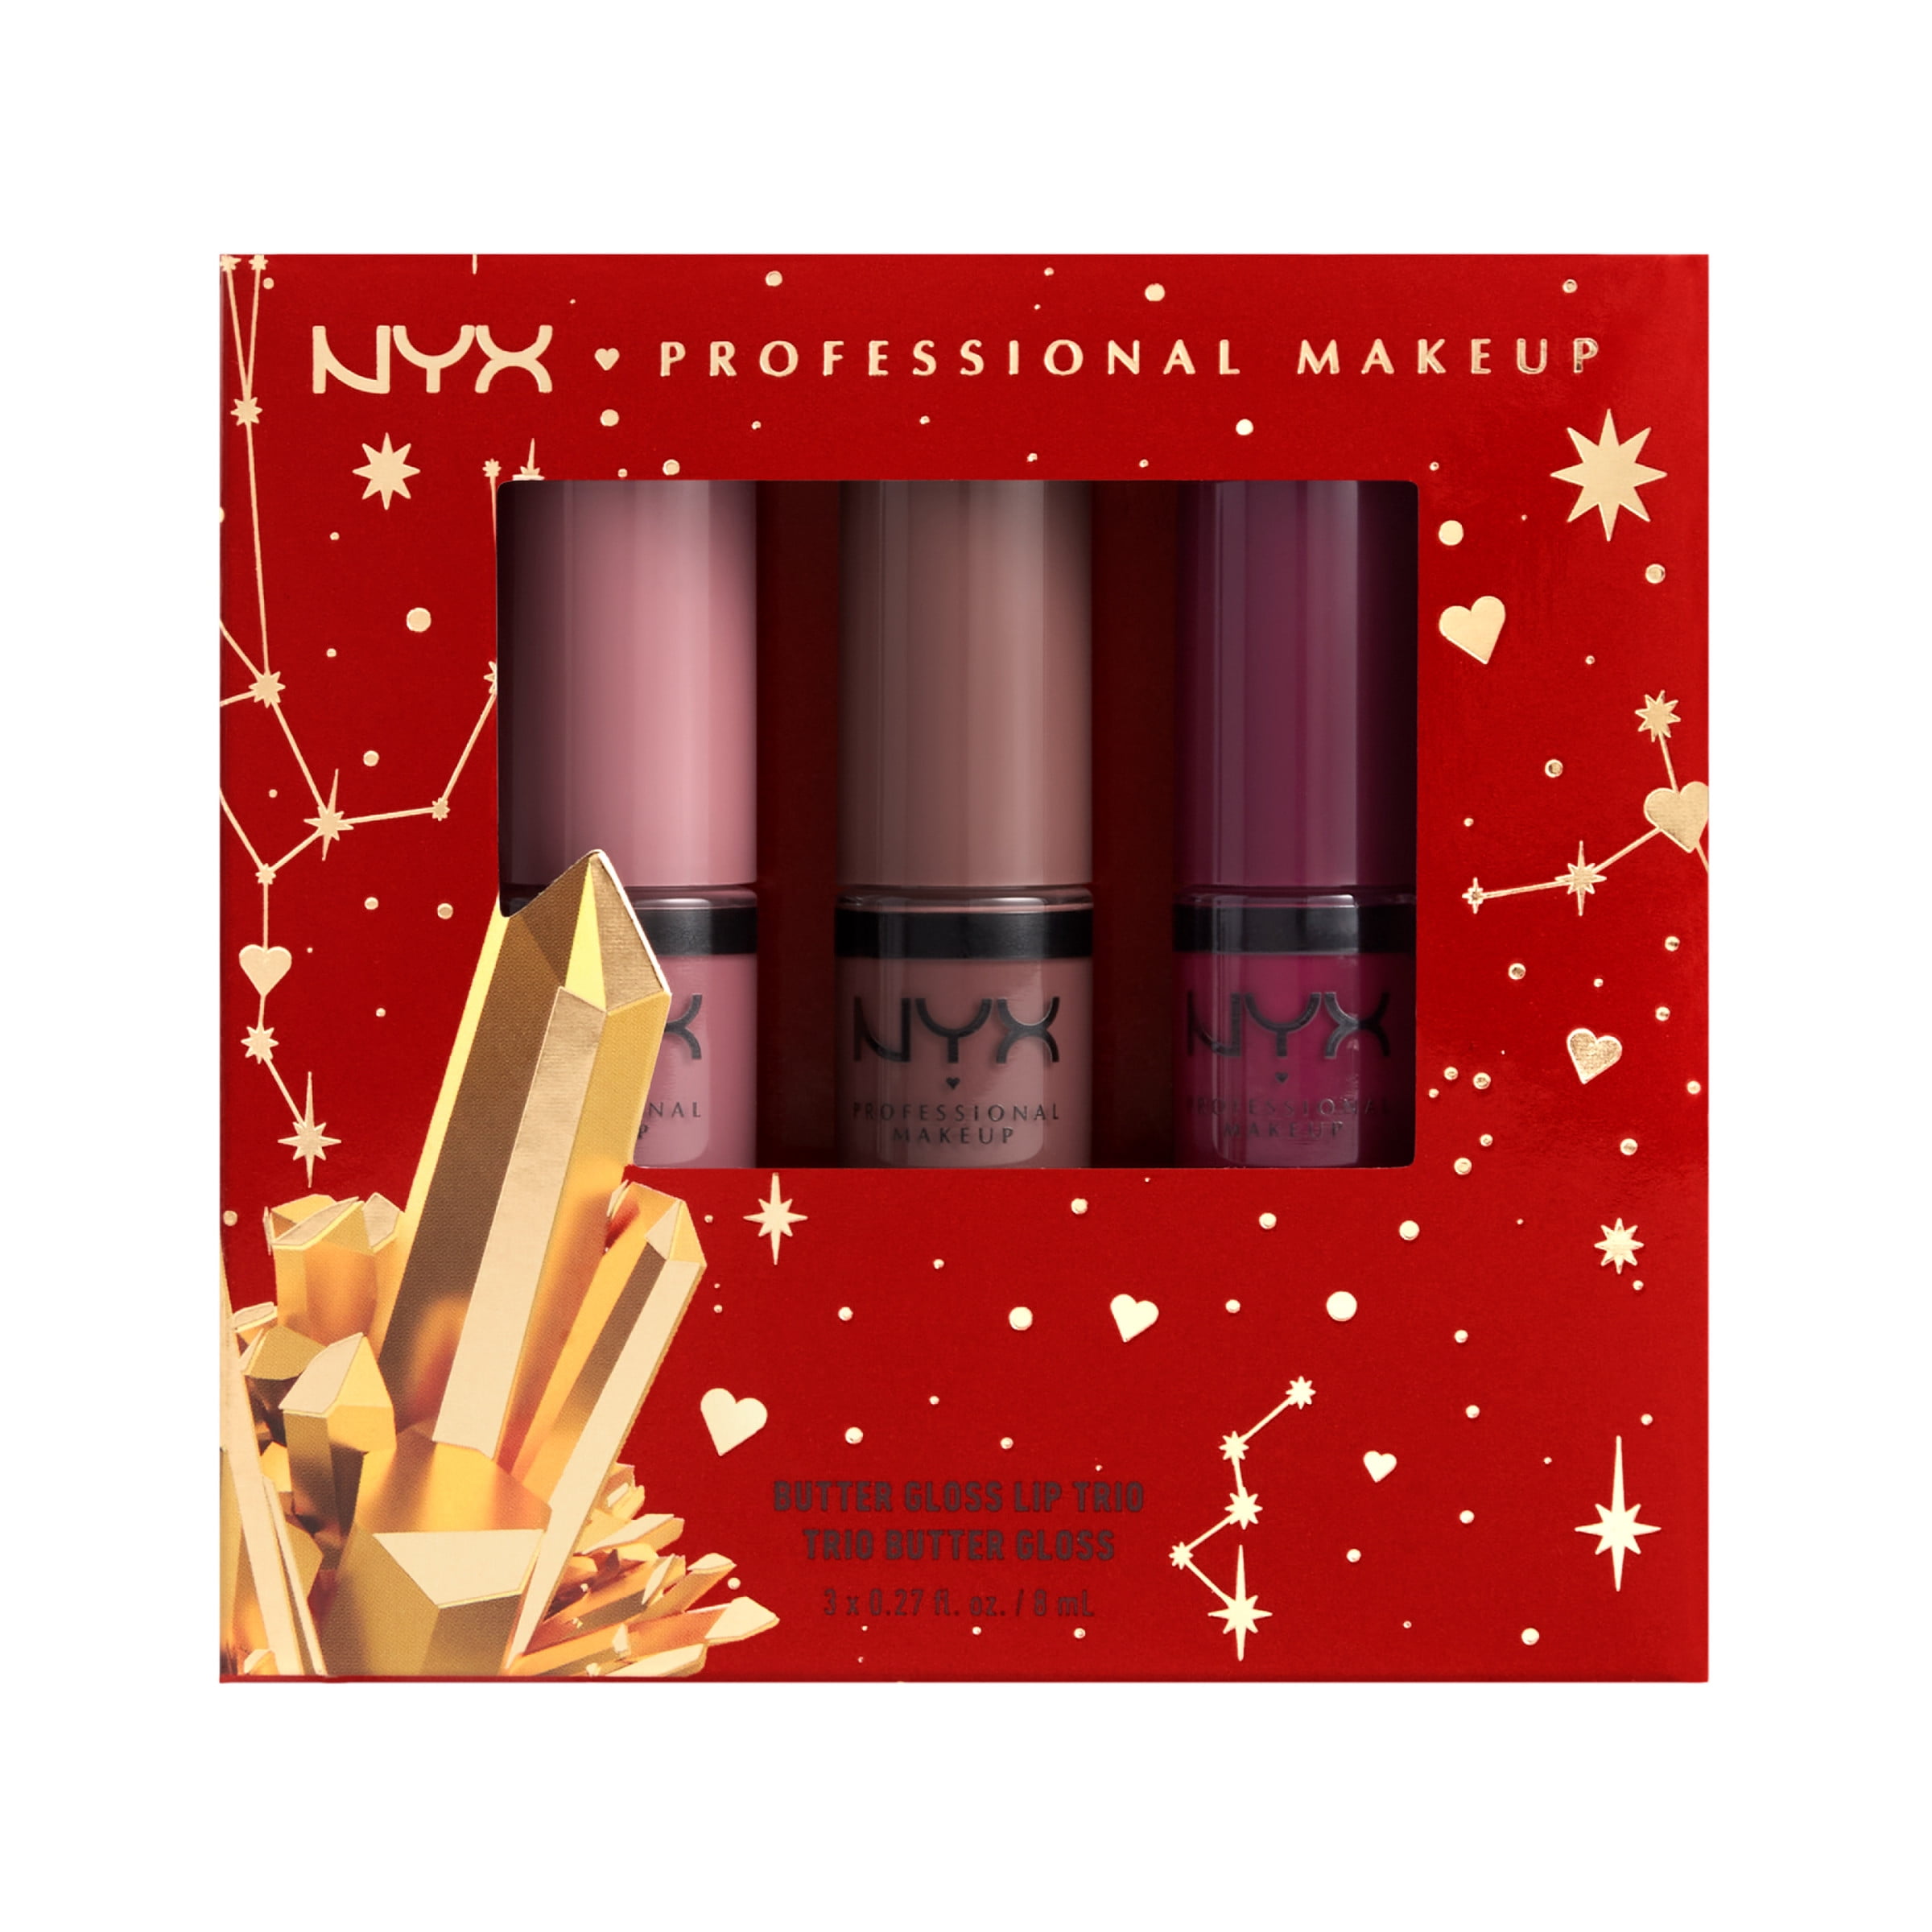 Non-Sticky Lip Gift Set Makeup Nudes, Professional Conditioning Gloss Trio, Piece NYX Sheer Dark Gloss Butter 3